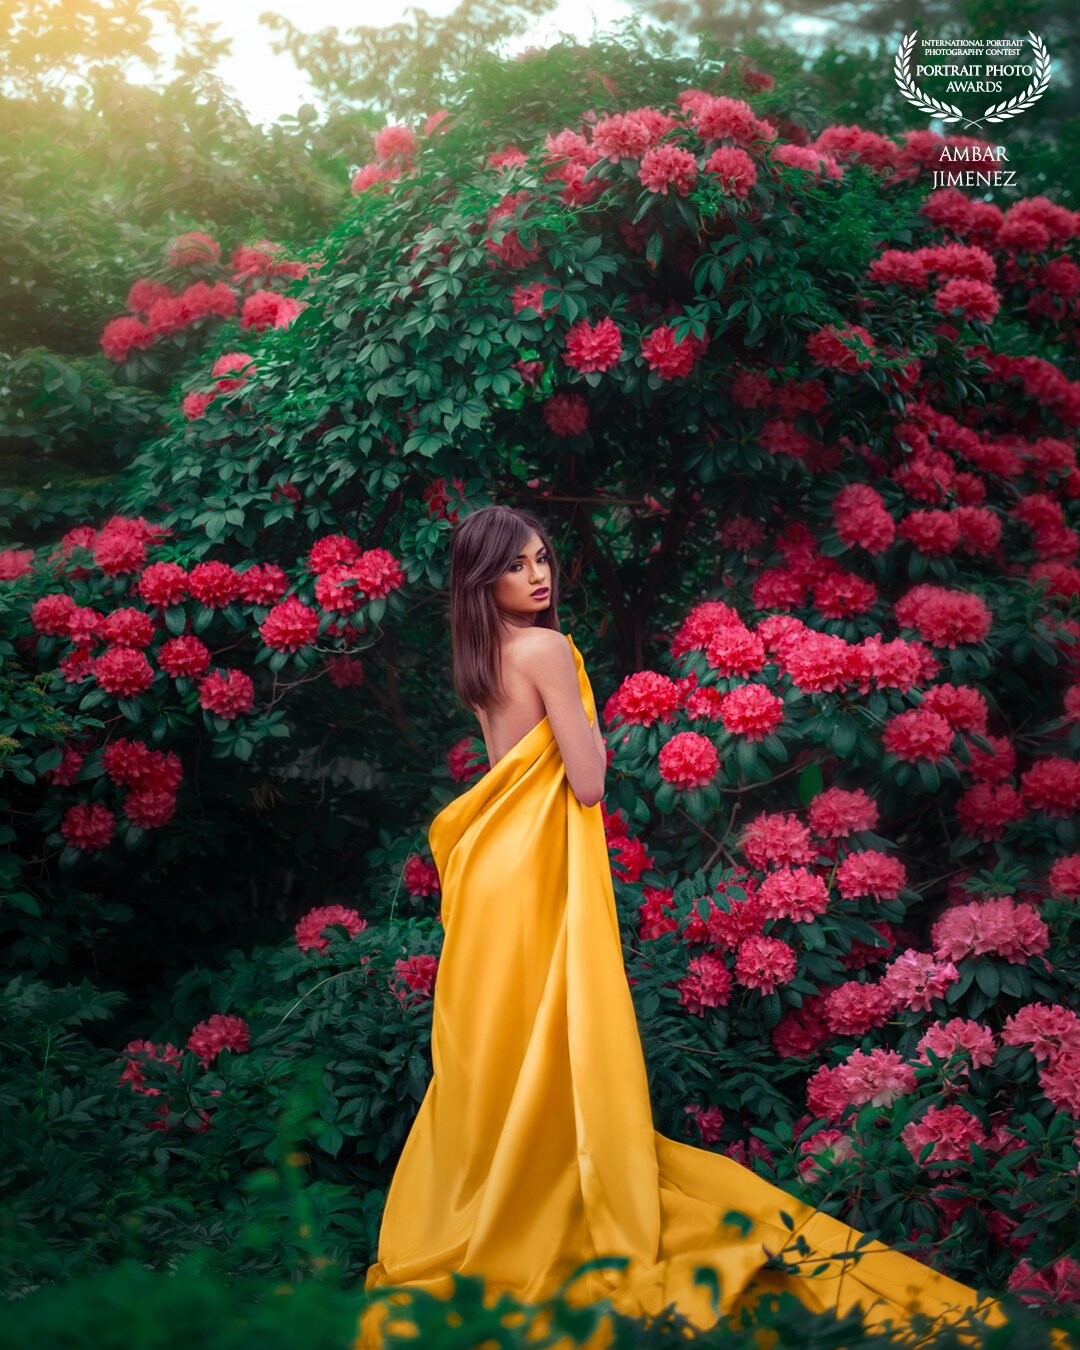 1) driving around I found this spot on the neighborhood. The place was so perfect that my model did not need a dress. My first option is always fabric so we made it natural, intimate and fresh. This Image shows the last days of spring in New Jersey.